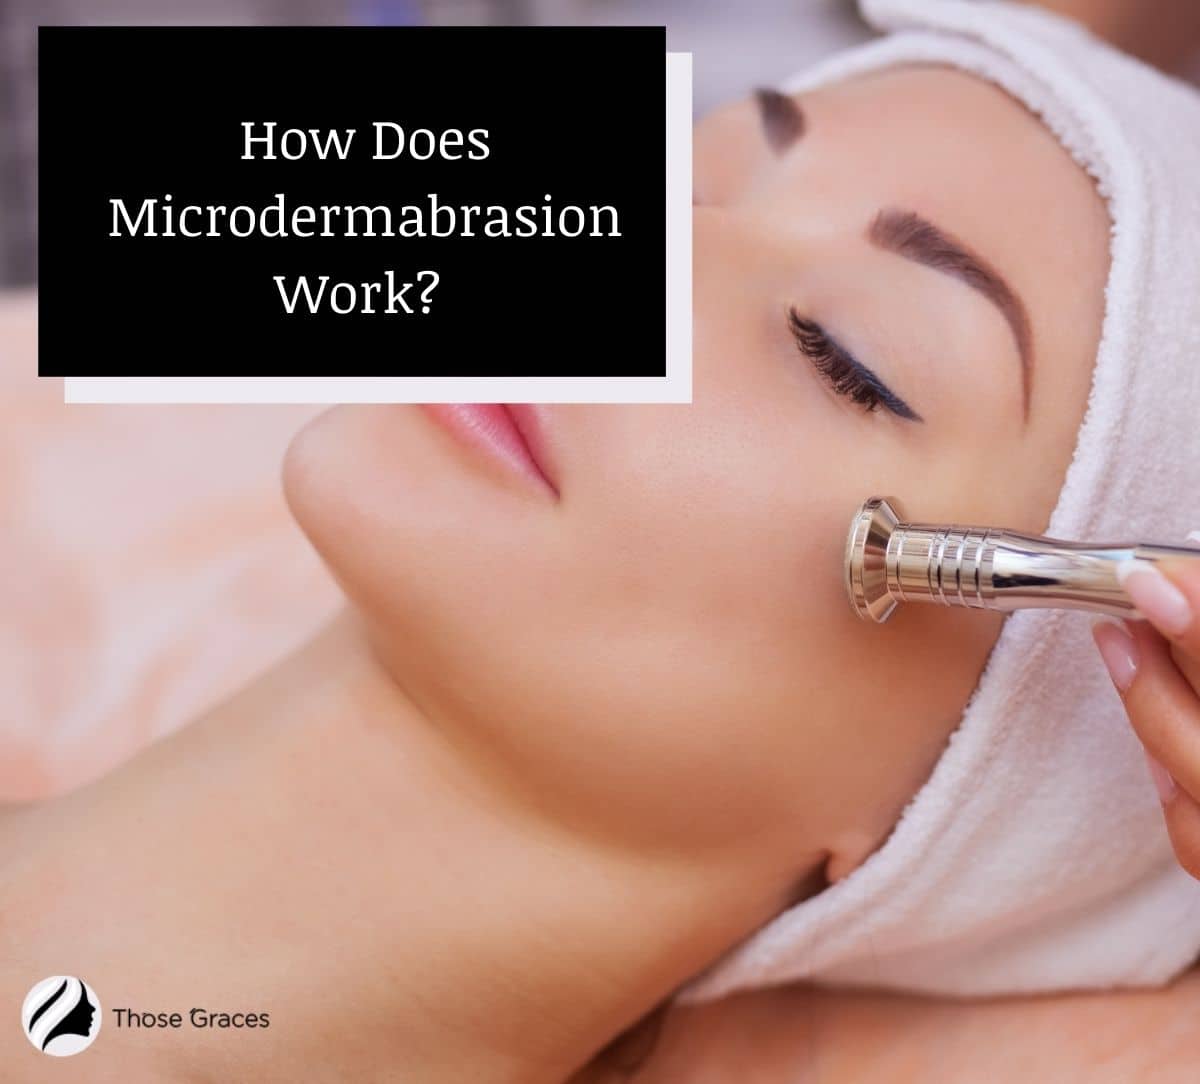 a girl getting microdermabrasion treatment, how does it work